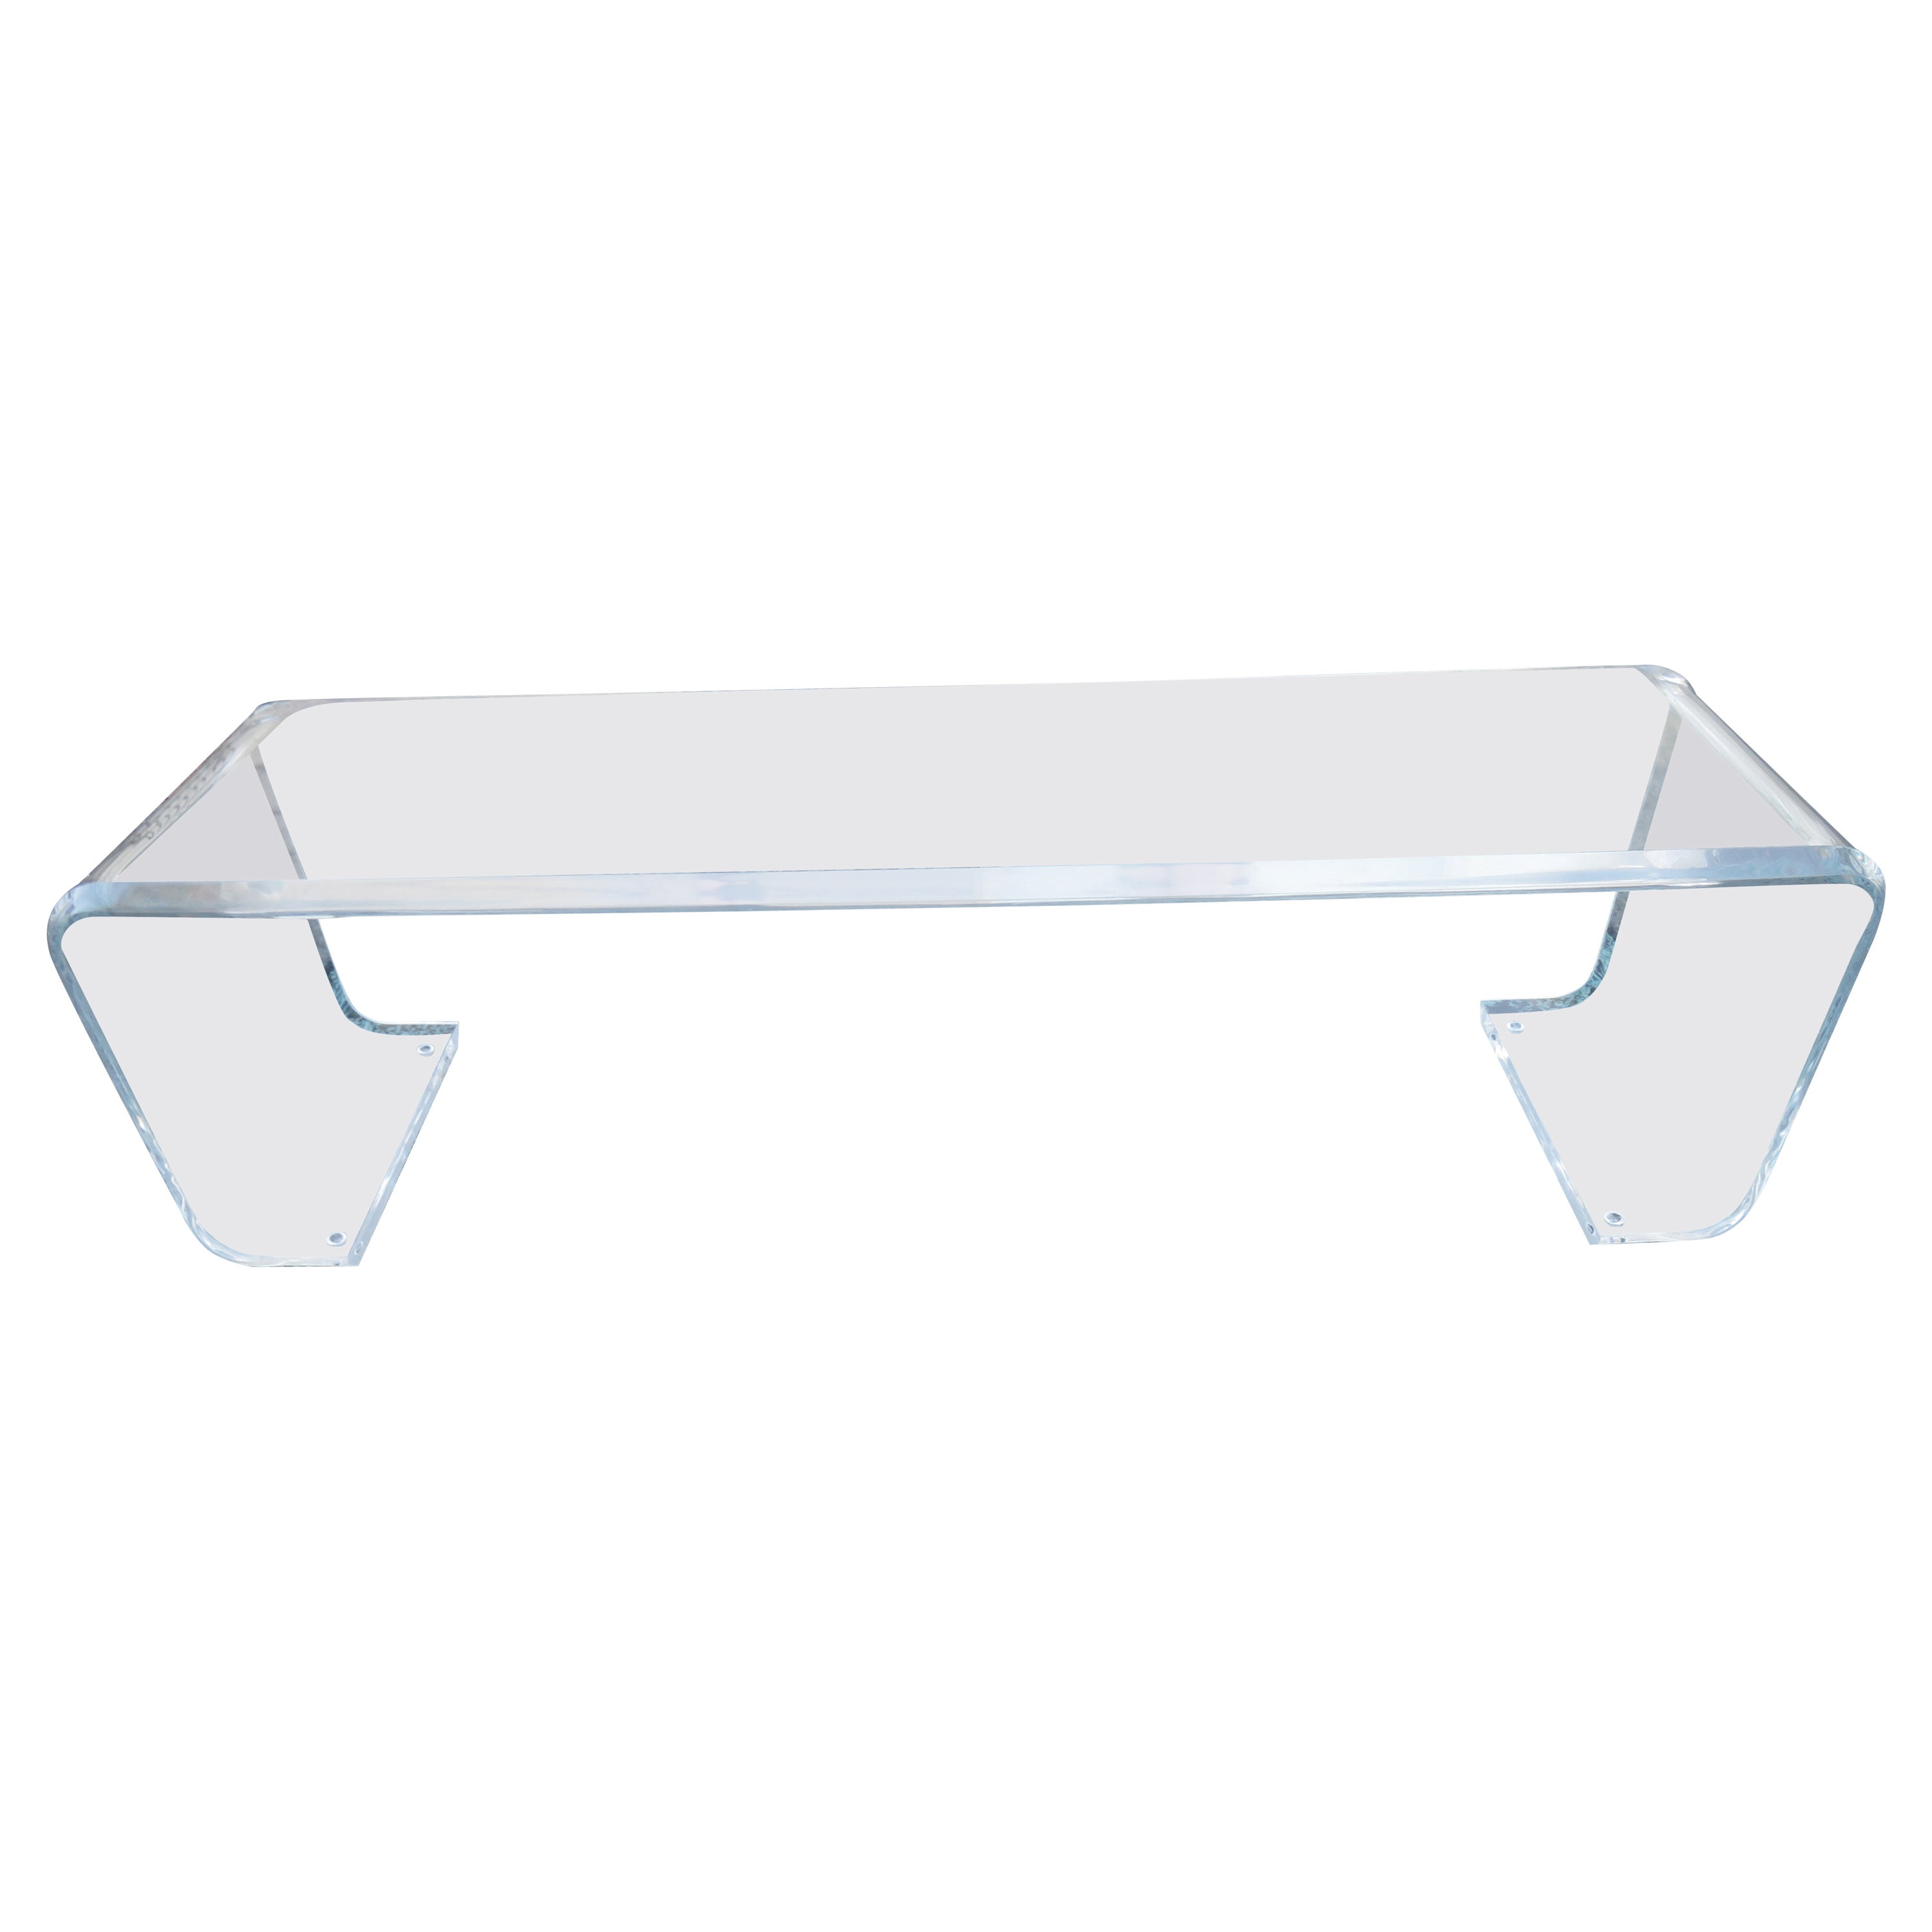 Sparkling Thick Chunky Lucite Scrolled Bench Mid-Century Modern For Sale